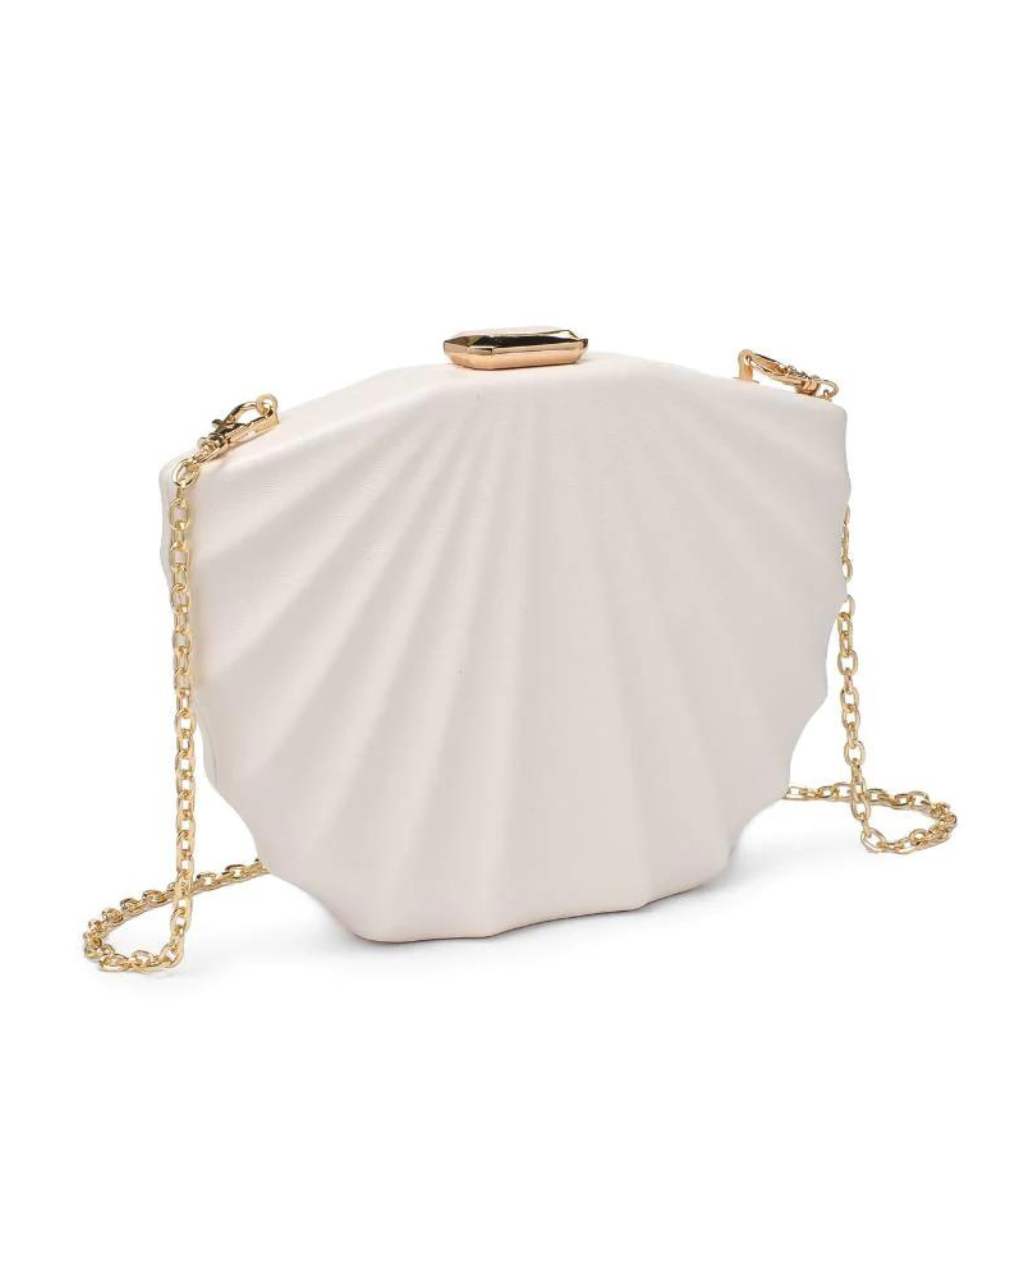 Oceane Crossbody Ivory, Daytime Bag by Urban Expressions | LIT Boutique